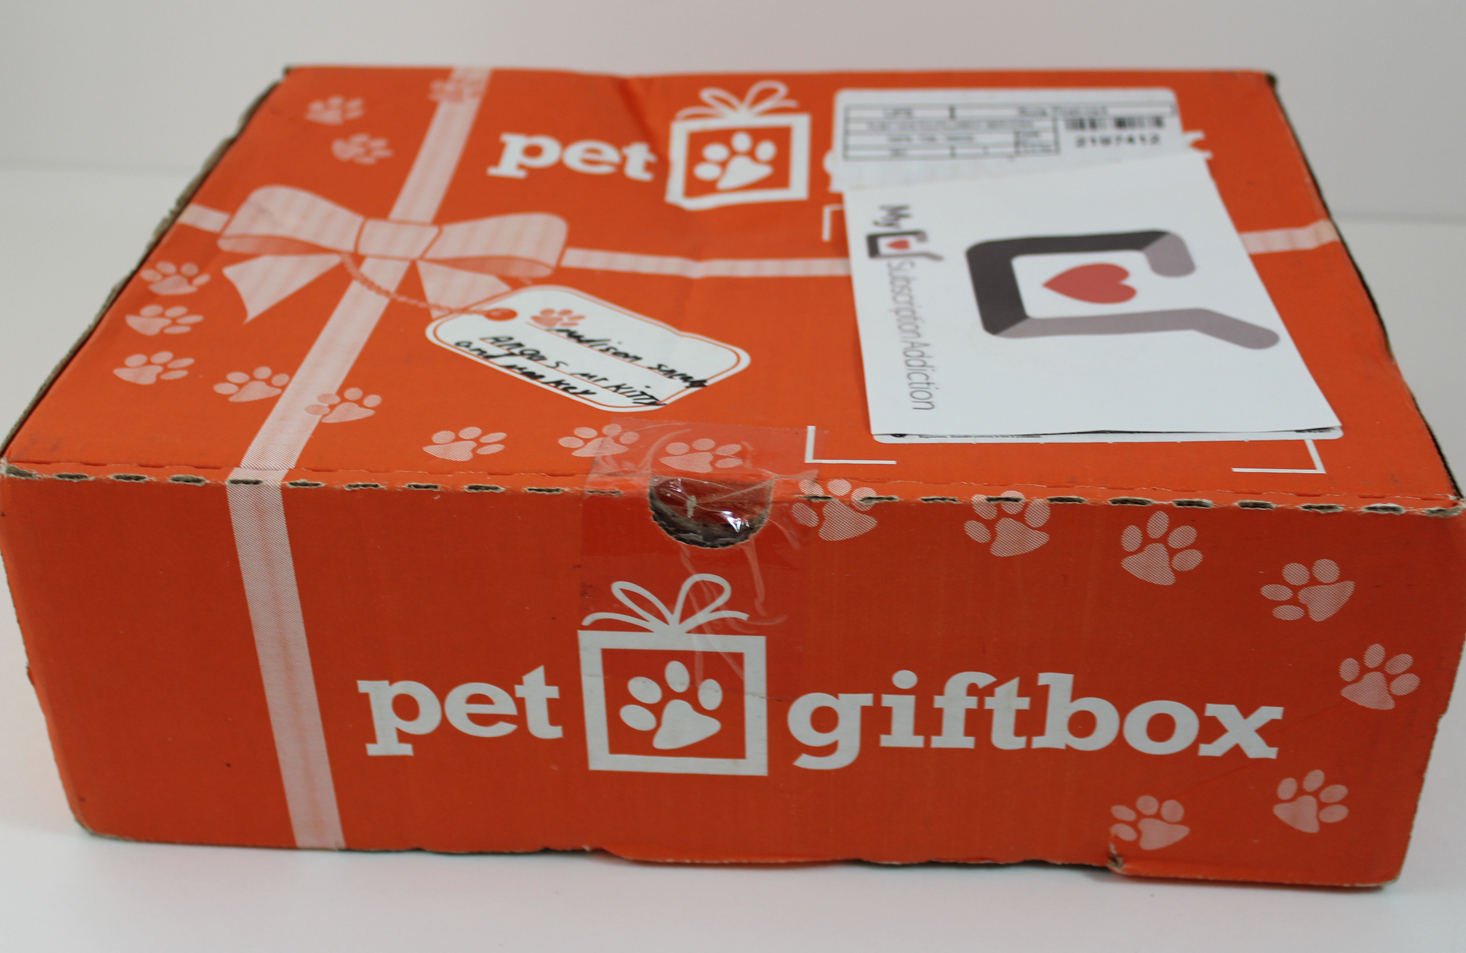 Pet GiftBox Cat Subscription Review + Coupon – August 2017